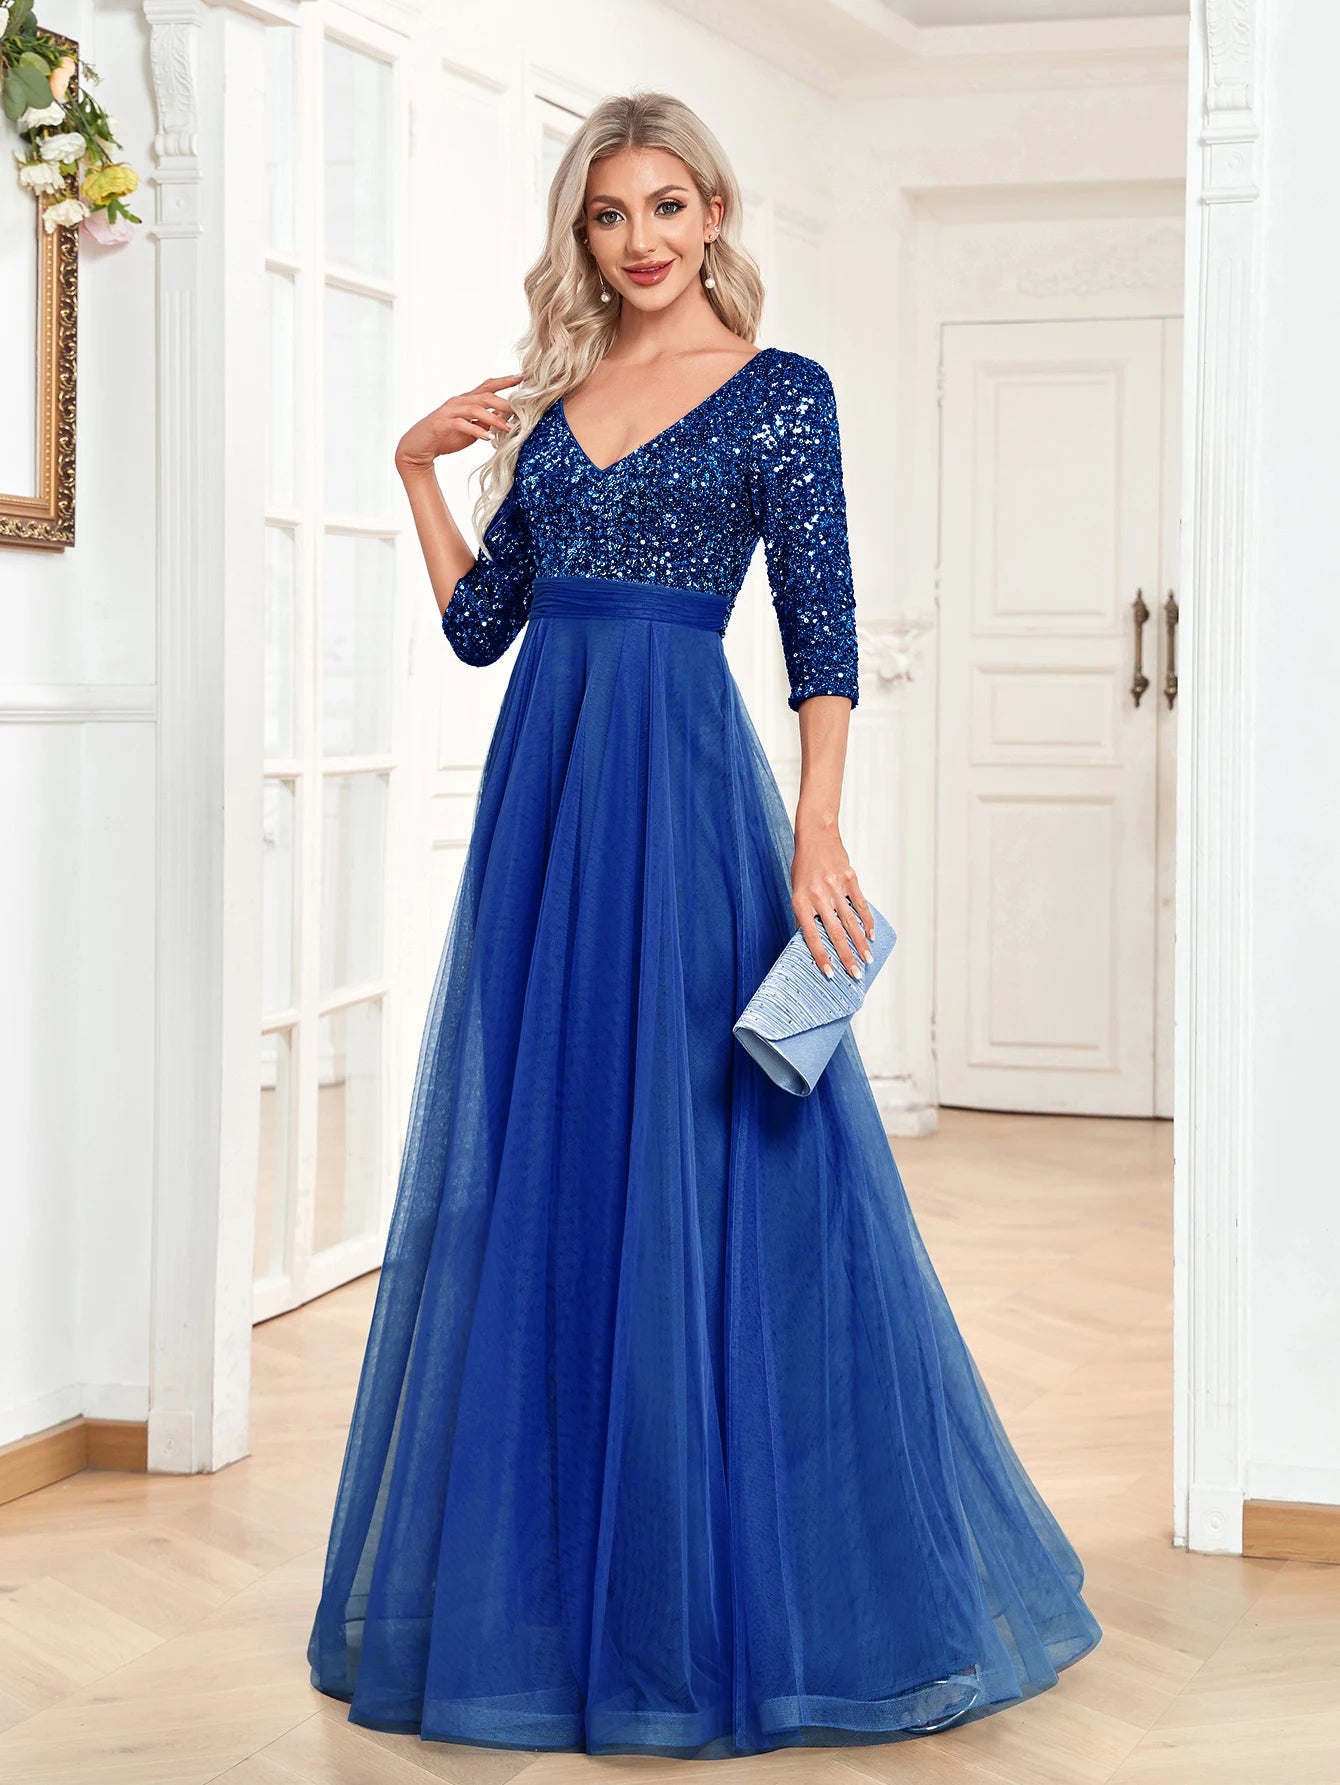 Elegant Chiffon Evening Dress/Mother of the Bride/Mother of the Groom